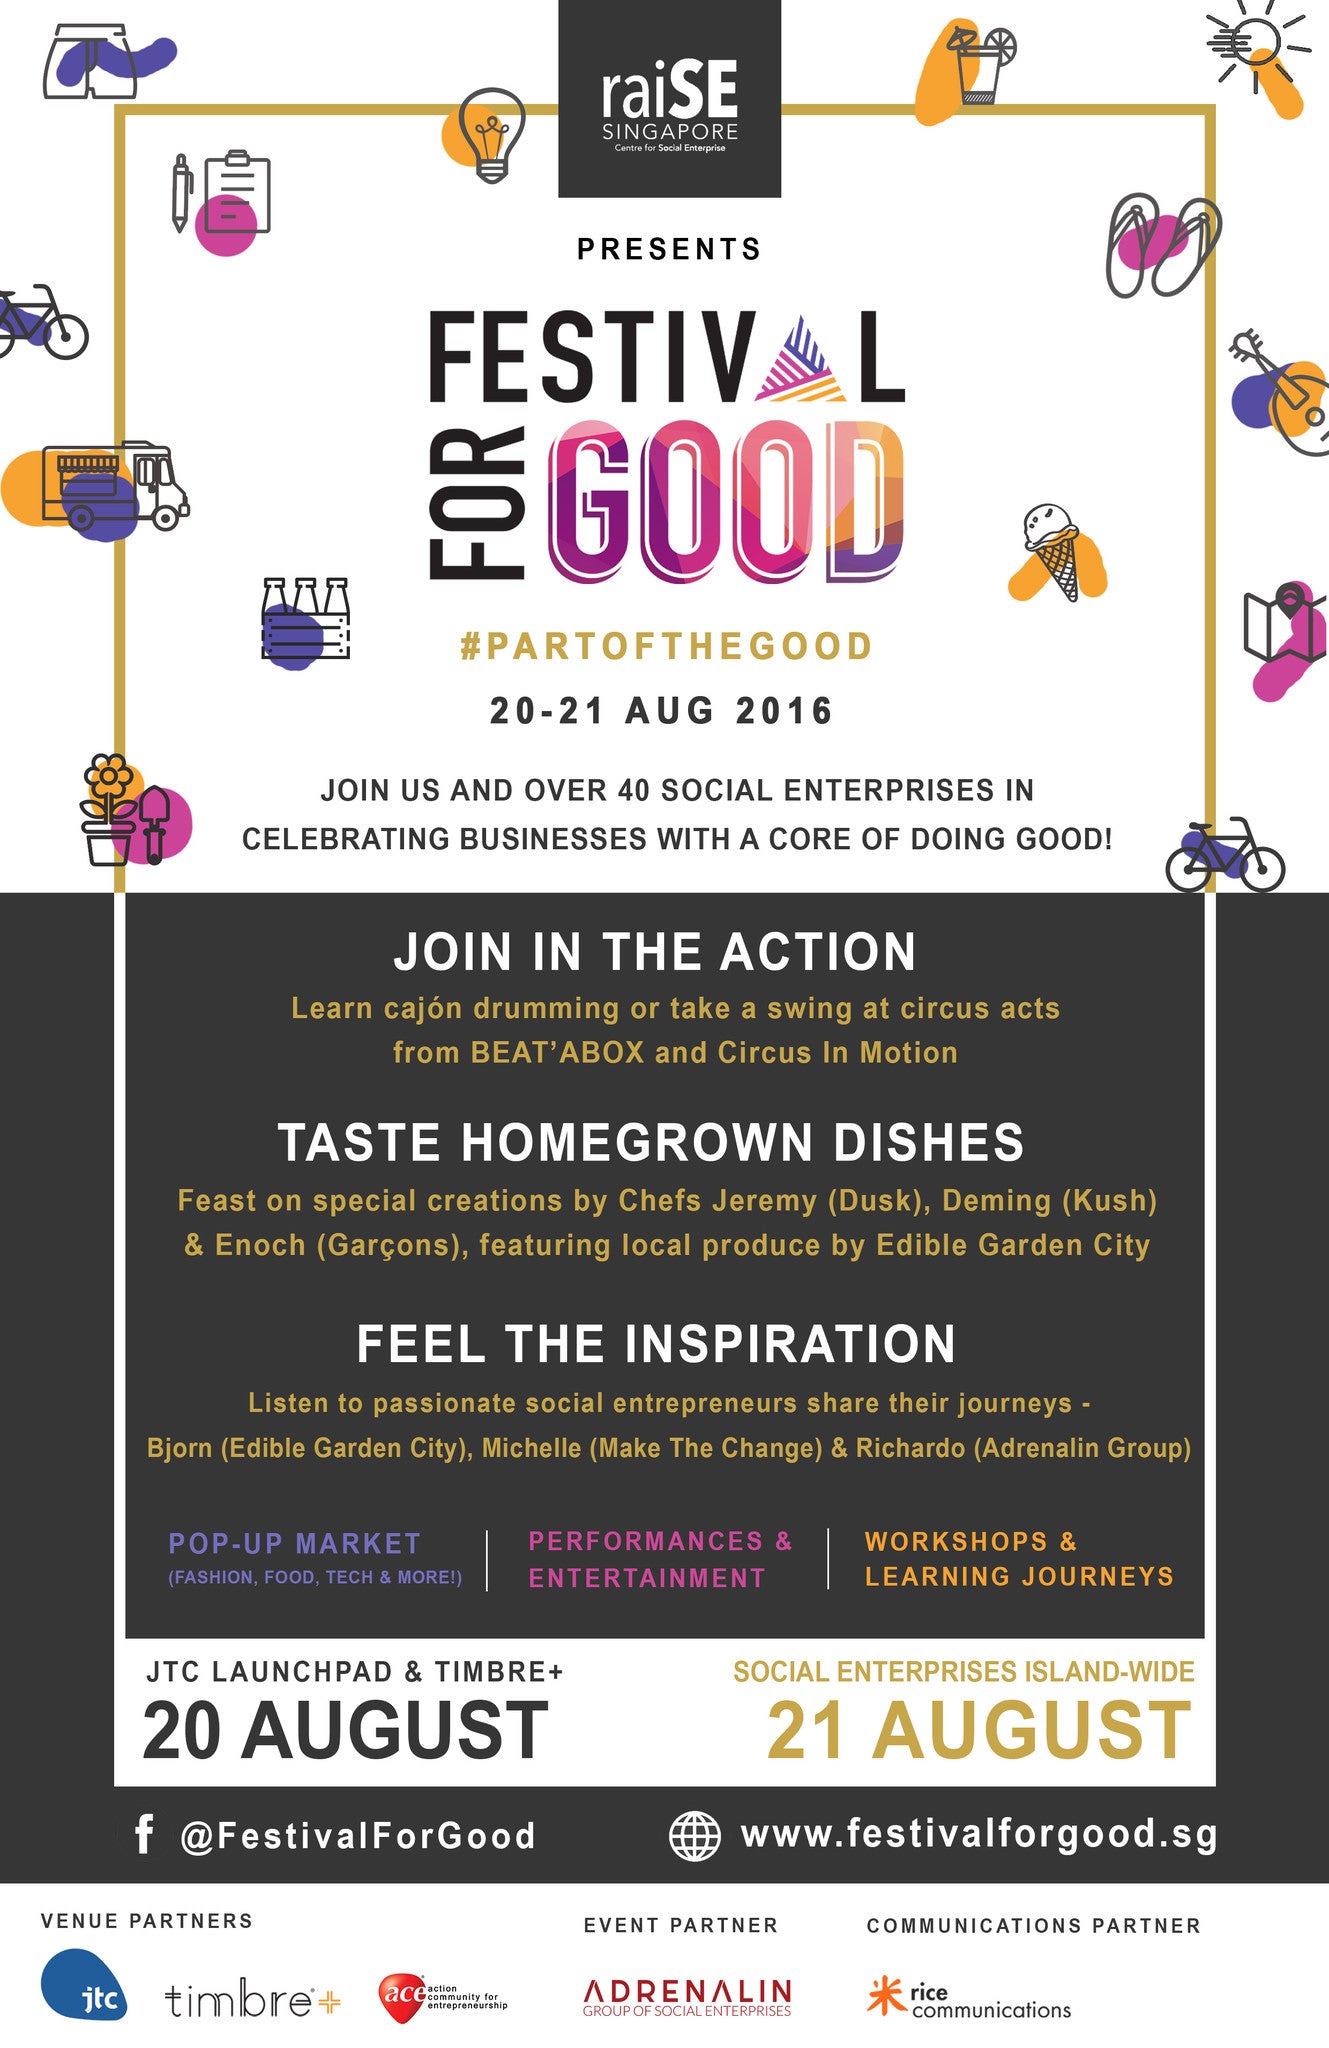 Pop-up at Festival for Good 20-21 August